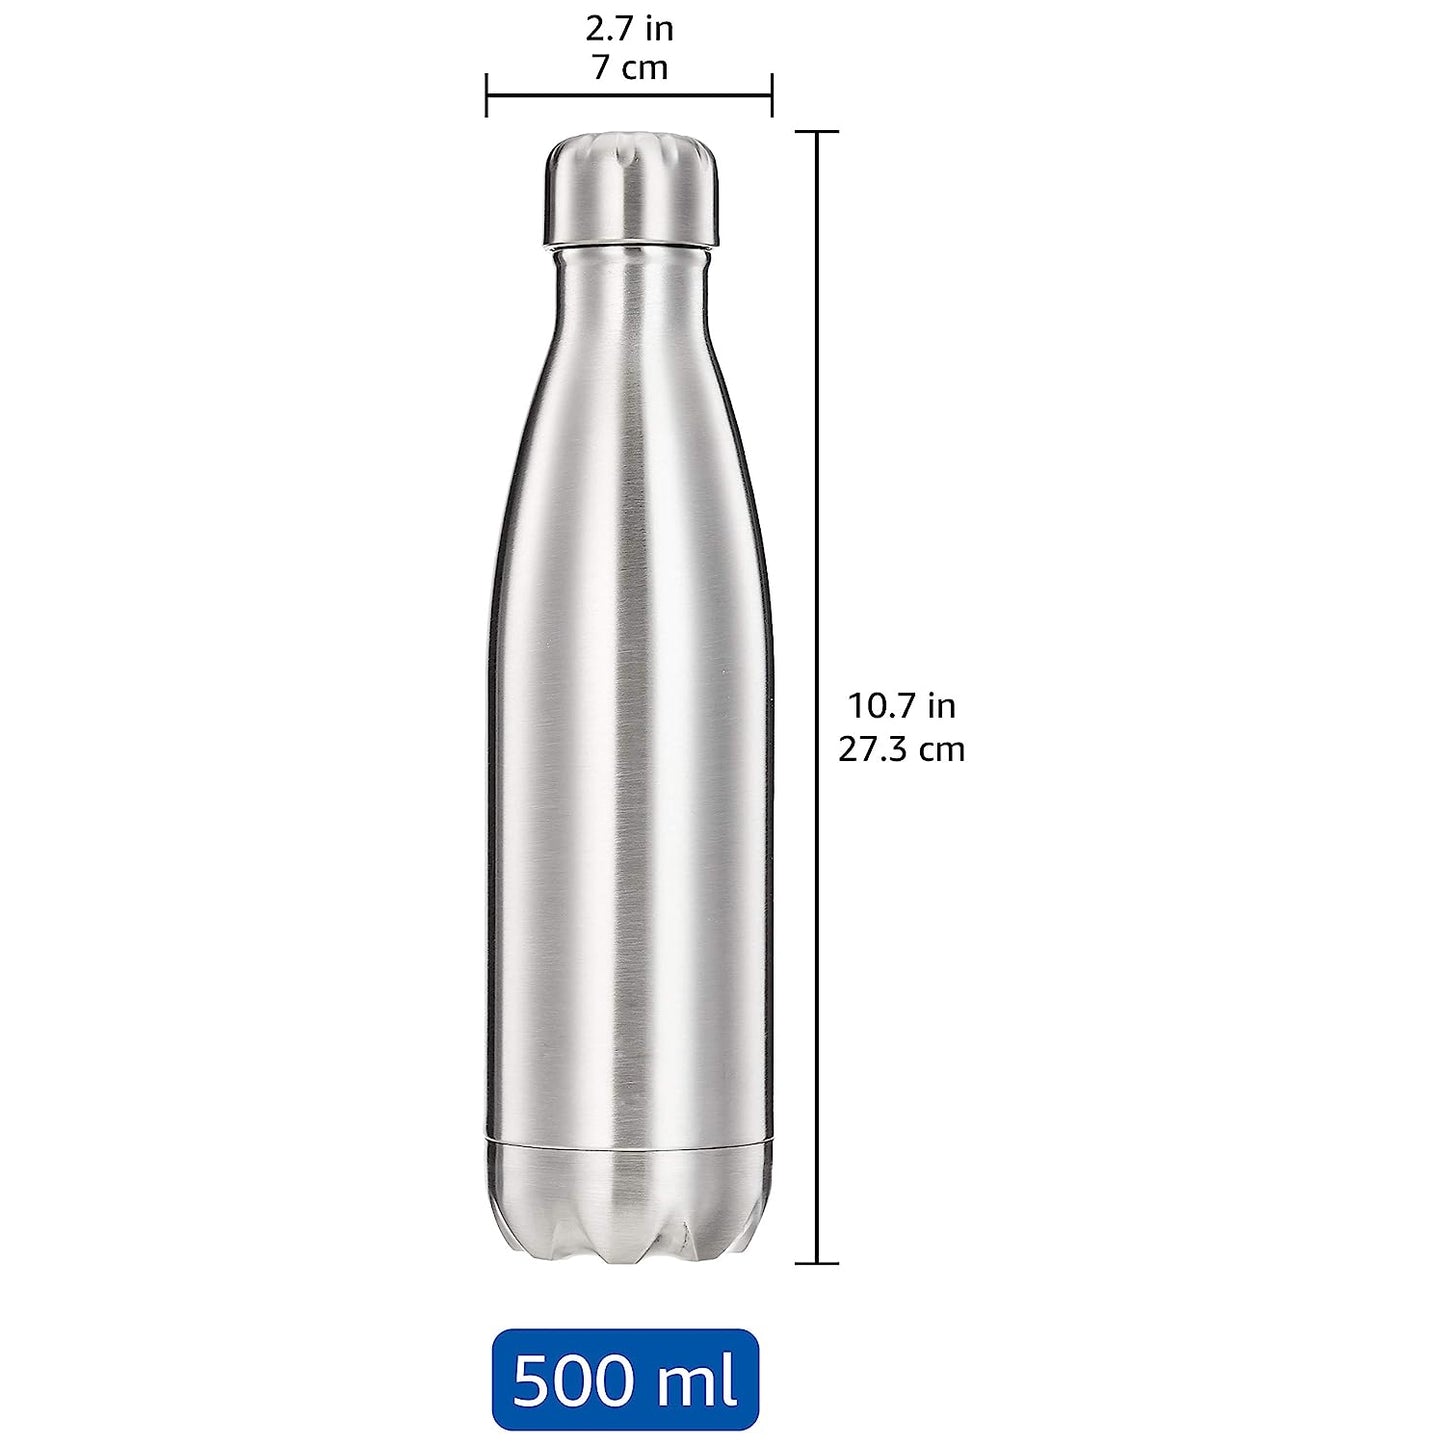 3874 Stainless Steel Hot or Cold Double Walled Flask Bottle 500 ml, Silver